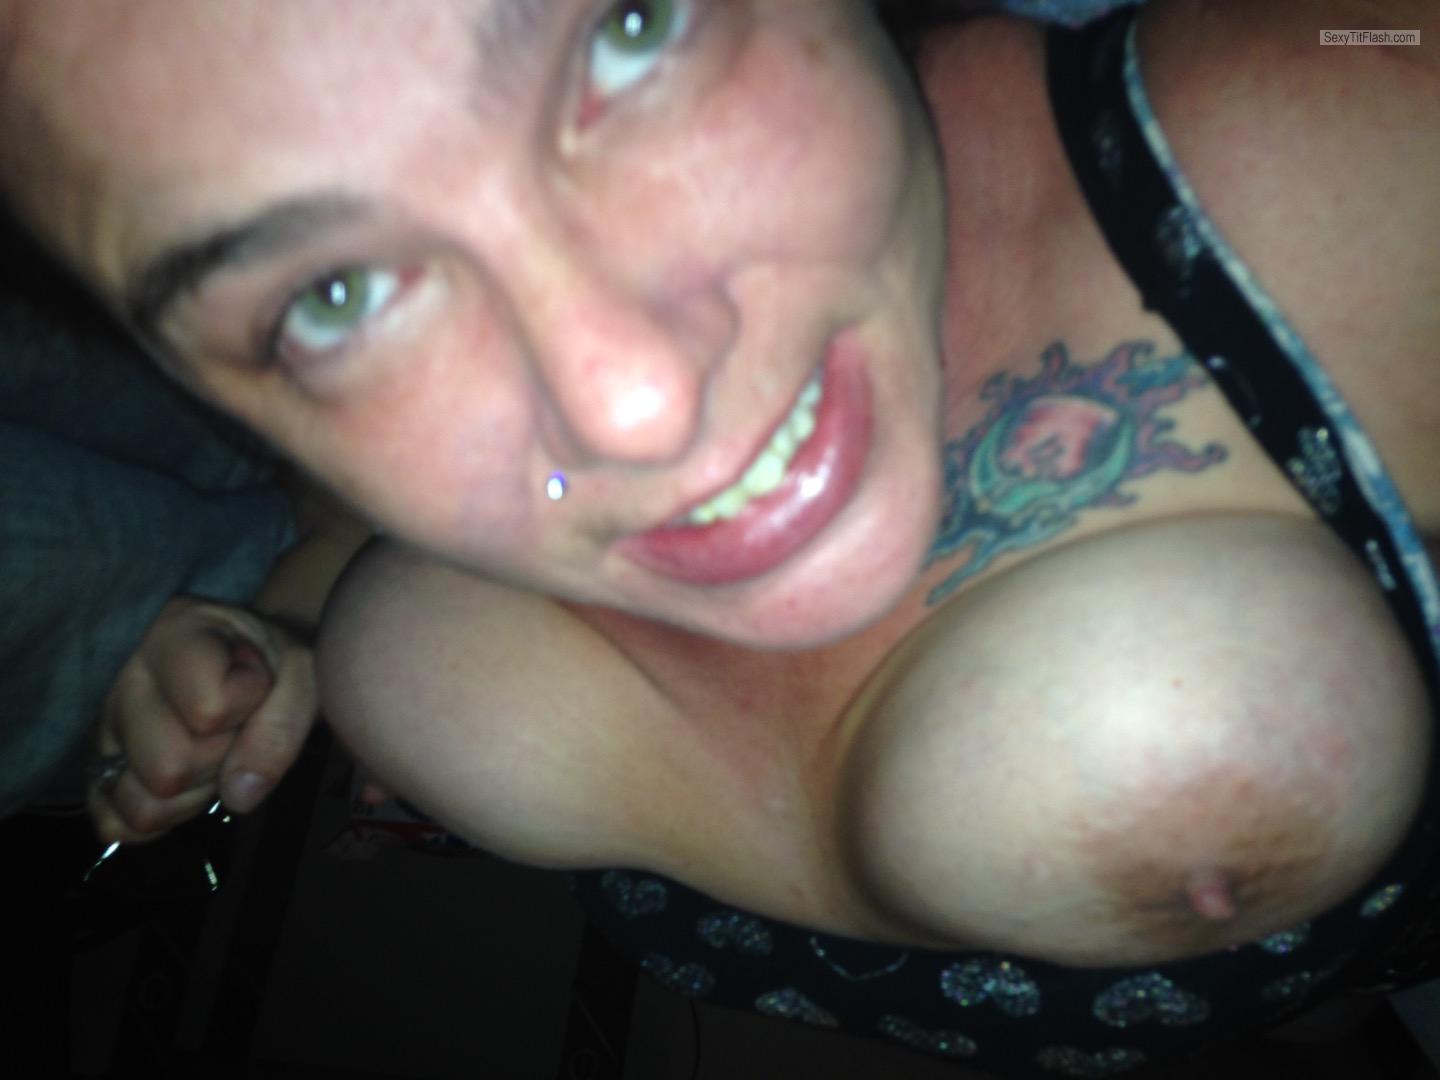 Tit Flash: My Very Big Tits (Selfie) - Topless Joie from United States